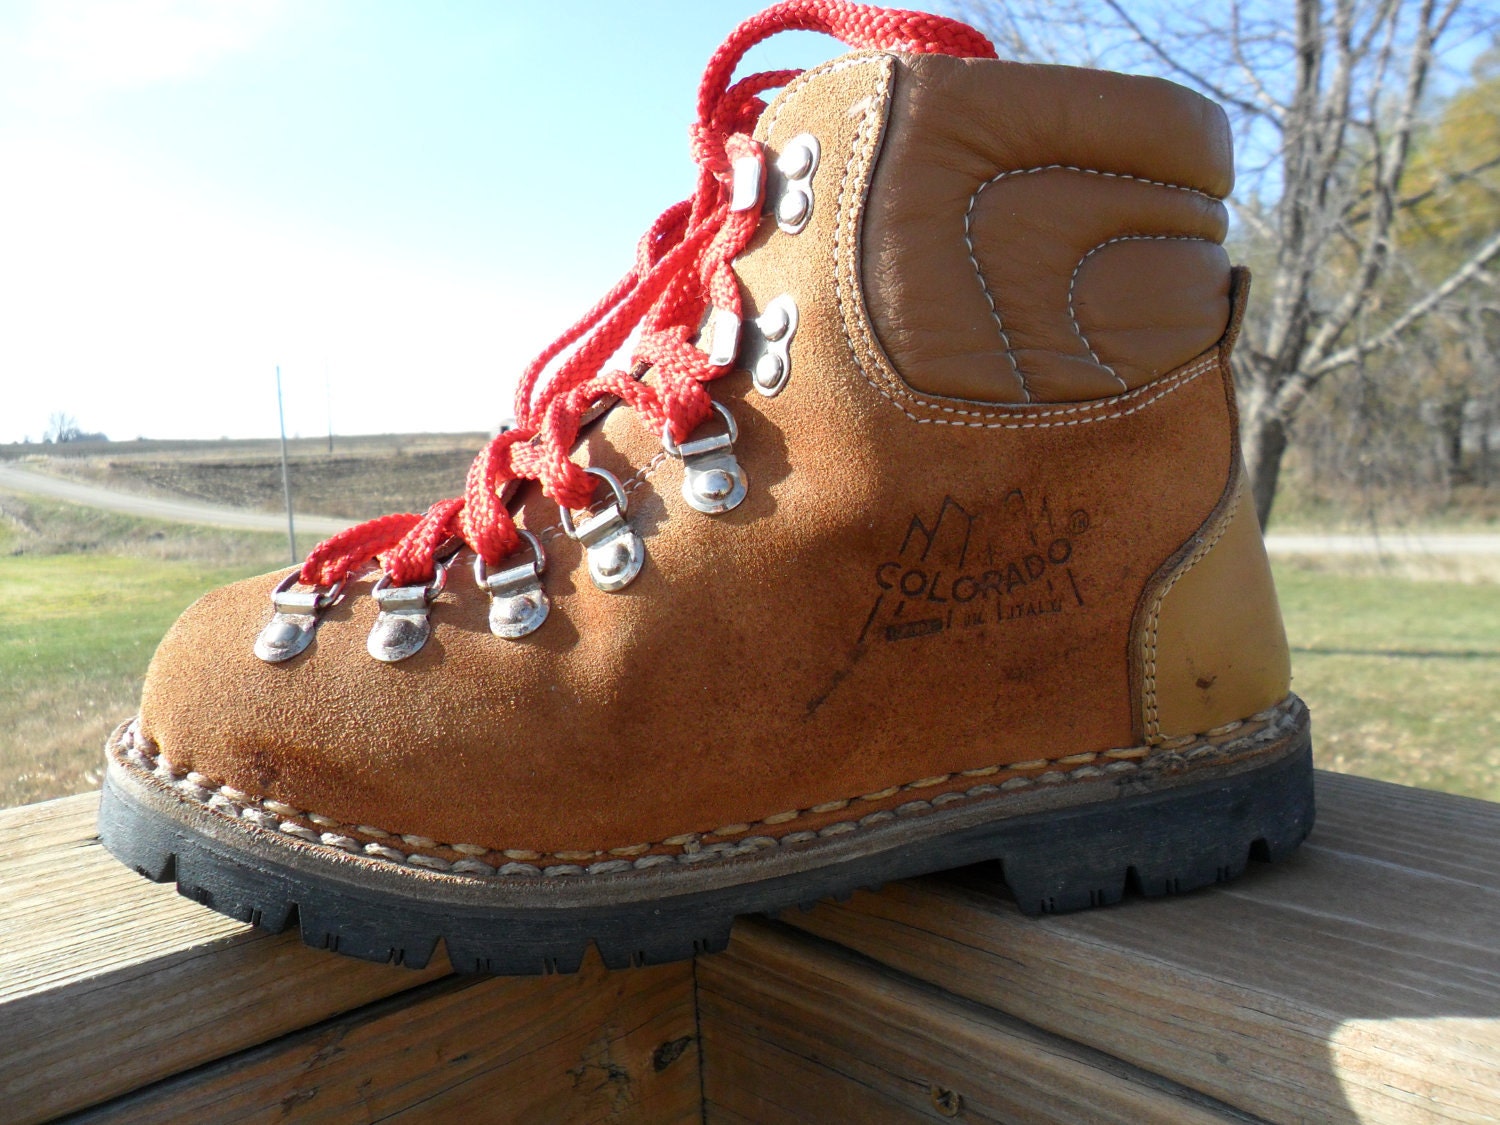 Vintage Colorado Steel Toe Hiking Boots Womens Size 7